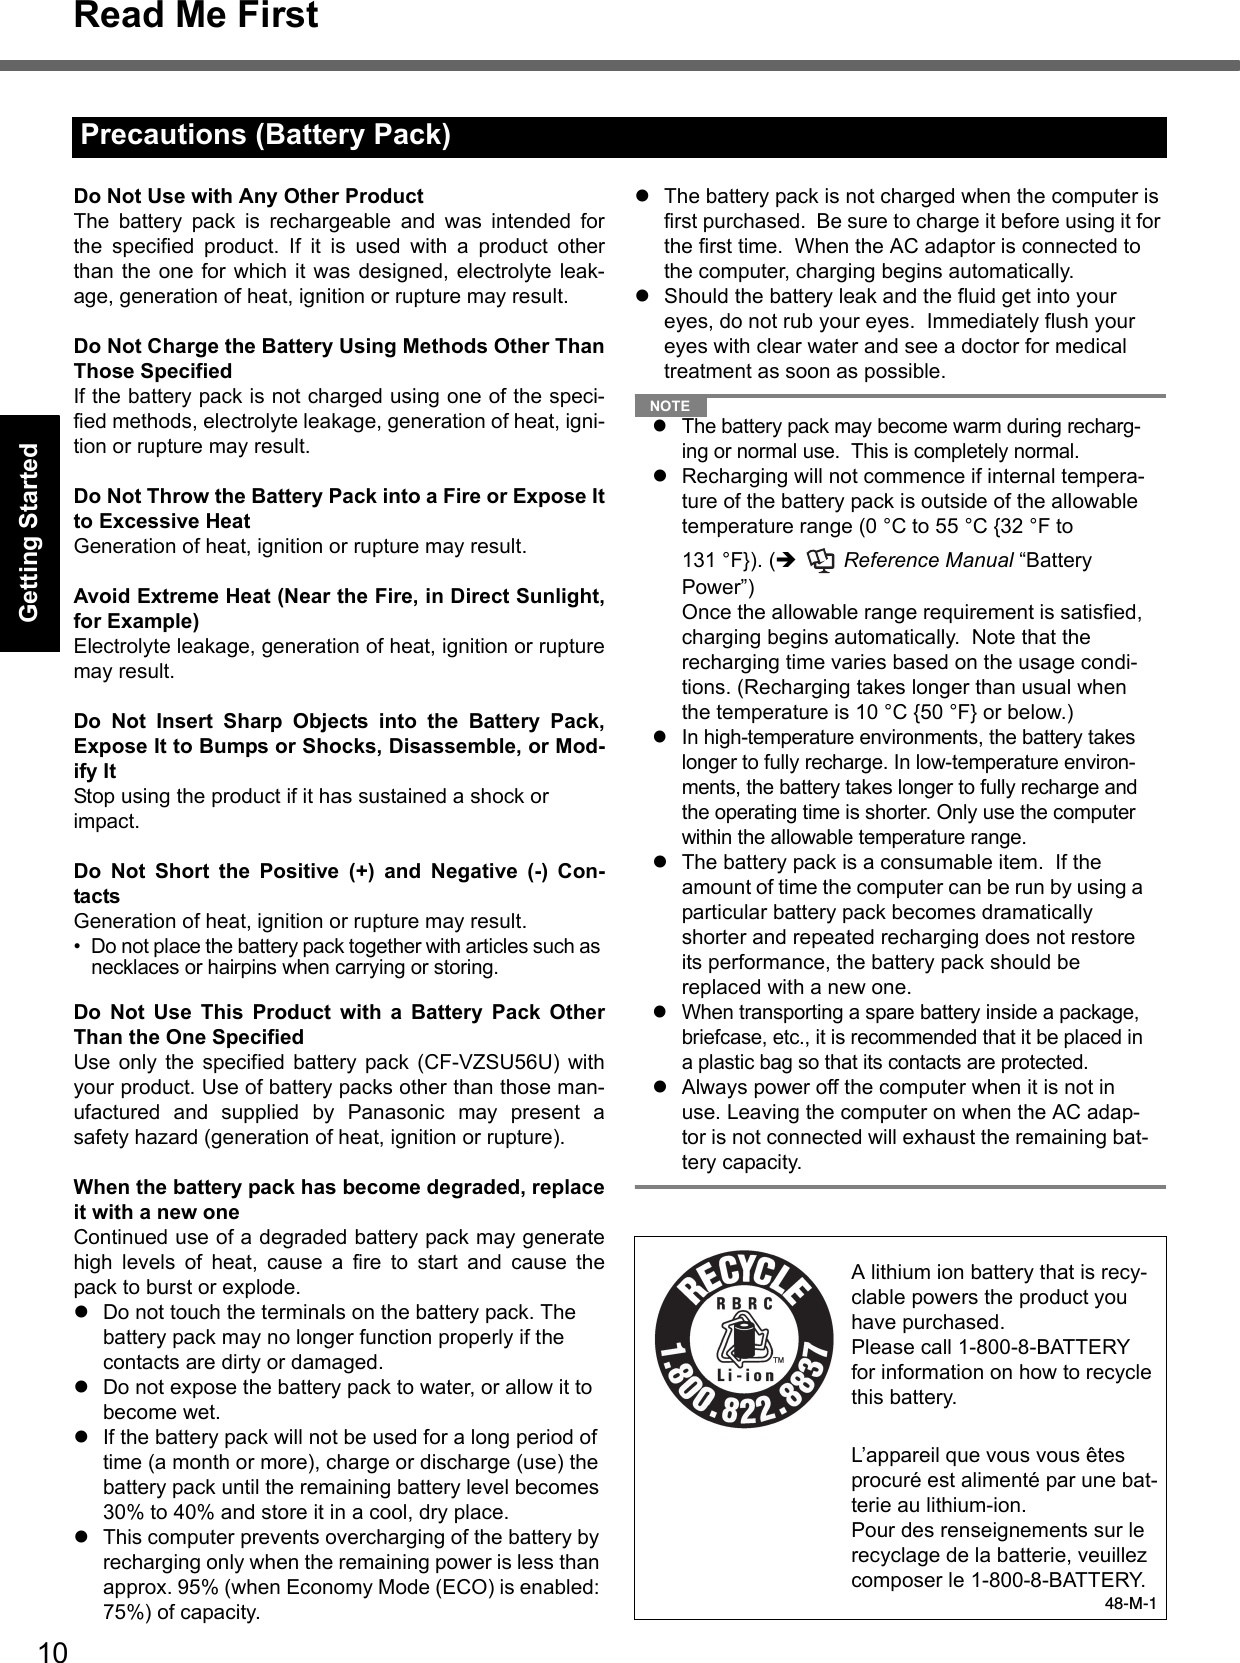 10Read Me FirstGetting StartedUseful InformationTroubleshootingAppendixDo Not Use with Any Other ProductThe battery pack is rechargeable and was intended forthe specified product. If it is used with a product otherthan the one for which it was designed, electrolyte leak-age, generation of heat, ignition or rupture may result.Do Not Charge the Battery Using Methods Other ThanThose SpecifiedIf the battery pack is not charged using one of the speci-fied methods, electrolyte leakage, generation of heat, igni-tion or rupture may result.Do Not Throw the Battery Pack into a Fire or Expose Itto Excessive HeatGeneration of heat, ignition or rupture may result.Avoid Extreme Heat (Near the Fire, in Direct Sunlight,for Example)Electrolyte leakage, generation of heat, ignition or rupturemay result.Do Not Insert Sharp Objects into the Battery Pack,Expose It to Bumps or Shocks, Disassemble, or Mod-ify ItStop using the product if it has sustained a shock or impact.Do Not Short the Positive (+) and Negative (-) Con-tactsGeneration of heat, ignition or rupture may result. • Do not place the battery pack together with articles such as necklaces or hairpins when carrying or storing.Do Not Use This Product with a Battery Pack OtherThan the One SpecifiedUse only the specified battery pack (CF-VZSU56U) withyour product. Use of battery packs other than those man-ufactured and supplied by Panasonic may present asafety hazard (generation of heat, ignition or rupture).When the battery pack has become degraded, replaceit with a new oneContinued use of a degraded battery pack may generatehigh levels of heat, cause a fire to start and cause thepack to burst or explode.Do not touch the terminals on the battery pack. The battery pack may no longer function properly if the contacts are dirty or damaged.Do not expose the battery pack to water, or allow it to become wet.If the battery pack will not be used for a long period of time (a month or more), charge or discharge (use) the battery pack until the remaining battery level becomes 30% to 40% and store it in a cool, dry place.This computer prevents overcharging of the battery by recharging only when the remaining power is less than approx. 95% (when Economy Mode (ECO) is enabled: 75%) of capacity.The battery pack is not charged when the computer is first purchased.  Be sure to charge it before using it for the first time.  When the AC adaptor is connected to the computer, charging begins automatically.Should the battery leak and the fluid get into your eyes, do not rub your eyes.  Immediately flush your eyes with clear water and see a doctor for medical treatment as soon as possible.NOTEThe battery pack may become warm during recharg-ing or normal use.  This is completely normal.Recharging will not commence if internal tempera-ture of the battery pack is outside of the allowable temperature range (0 °C to 55 °C {32 °F to 131 °F}). (  Reference Manual “Battery Power”)  Once the allowable range requirement is satisfied, charging begins automatically.  Note that the recharging time varies based on the usage condi-tions. (Recharging takes longer than usual when the temperature is 10 °C {50 °F} or below.)In high-temperature environments, the battery takes longer to fully recharge. In low-temperature environ-ments, the battery takes longer to fully recharge and the operating time is shorter. Only use the computer within the allowable temperature range.The battery pack is a consumable item.  If the amount of time the computer can be run by using a particular battery pack becomes dramatically shorter and repeated recharging does not restore its performance, the battery pack should be replaced with a new one.  When transporting a spare battery inside a package, briefcase, etc., it is recommended that it be placed in a plastic bag so that its contacts are protected.Always power off the computer when it is not in use. Leaving the computer on when the AC adap-tor is not connected will exhaust the remaining bat-tery capacity.Precautions (Battery Pack)A lithium ion battery that is recy-clable powers the product you have purchased.Please call 1-800-8-BATTERY for information on how to recycle this battery.L’appareil que vous vous êtes procuré est alimenté par une bat-terie au lithium-ion.Pour des renseignements sur le recyclage de la batterie, veuillez composer le 1-800-8-BATTERY.48-M-1